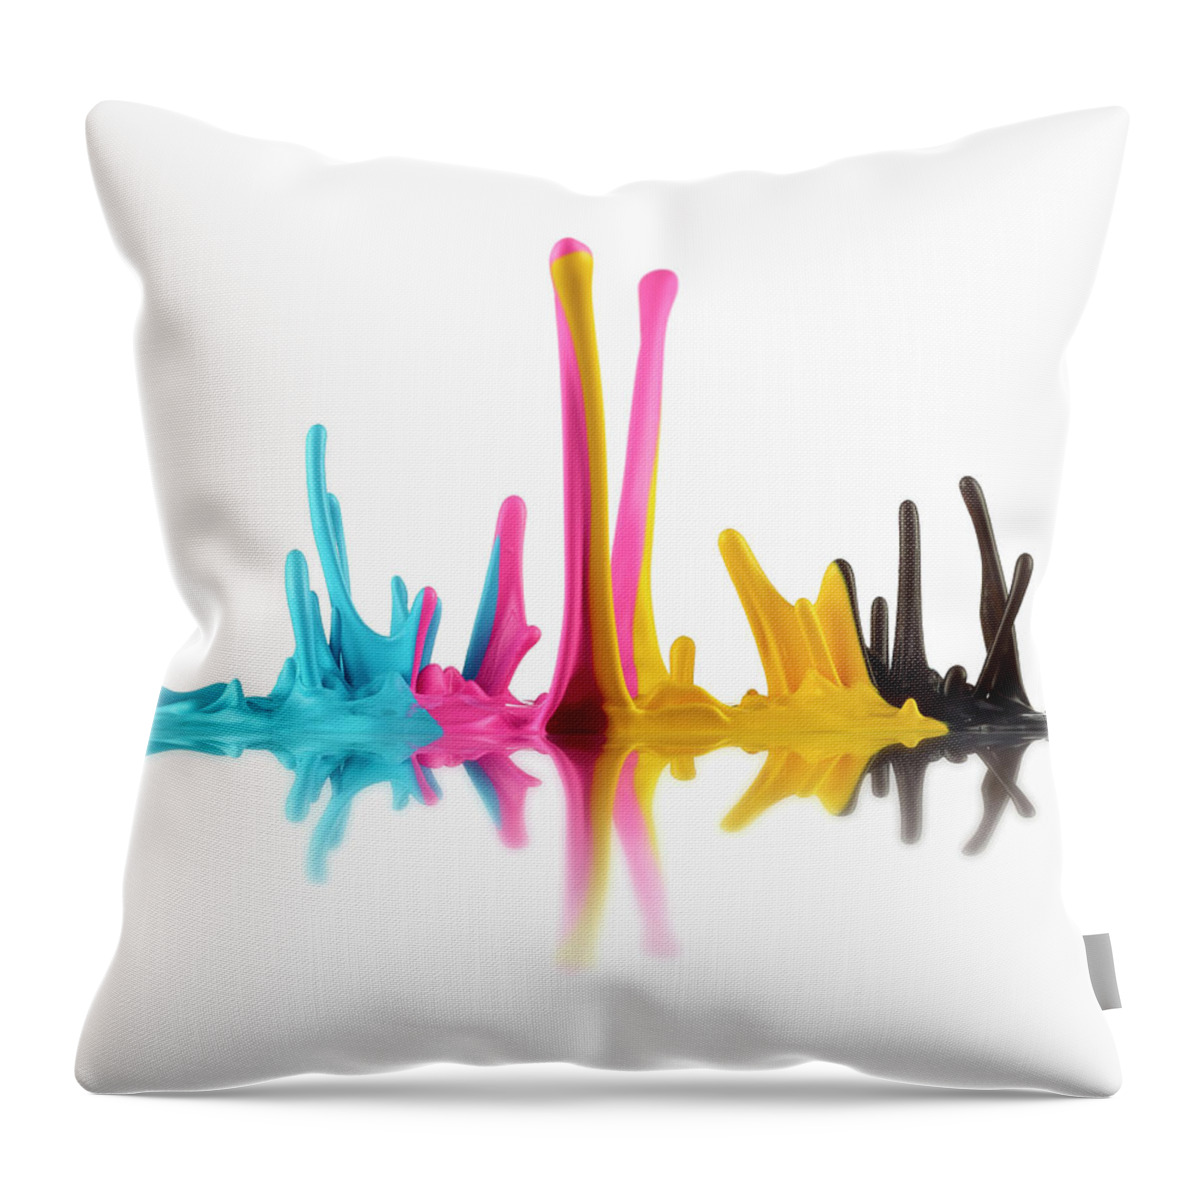 White Background Throw Pillow featuring the photograph Cmyk Printing Ink by Don Farrall